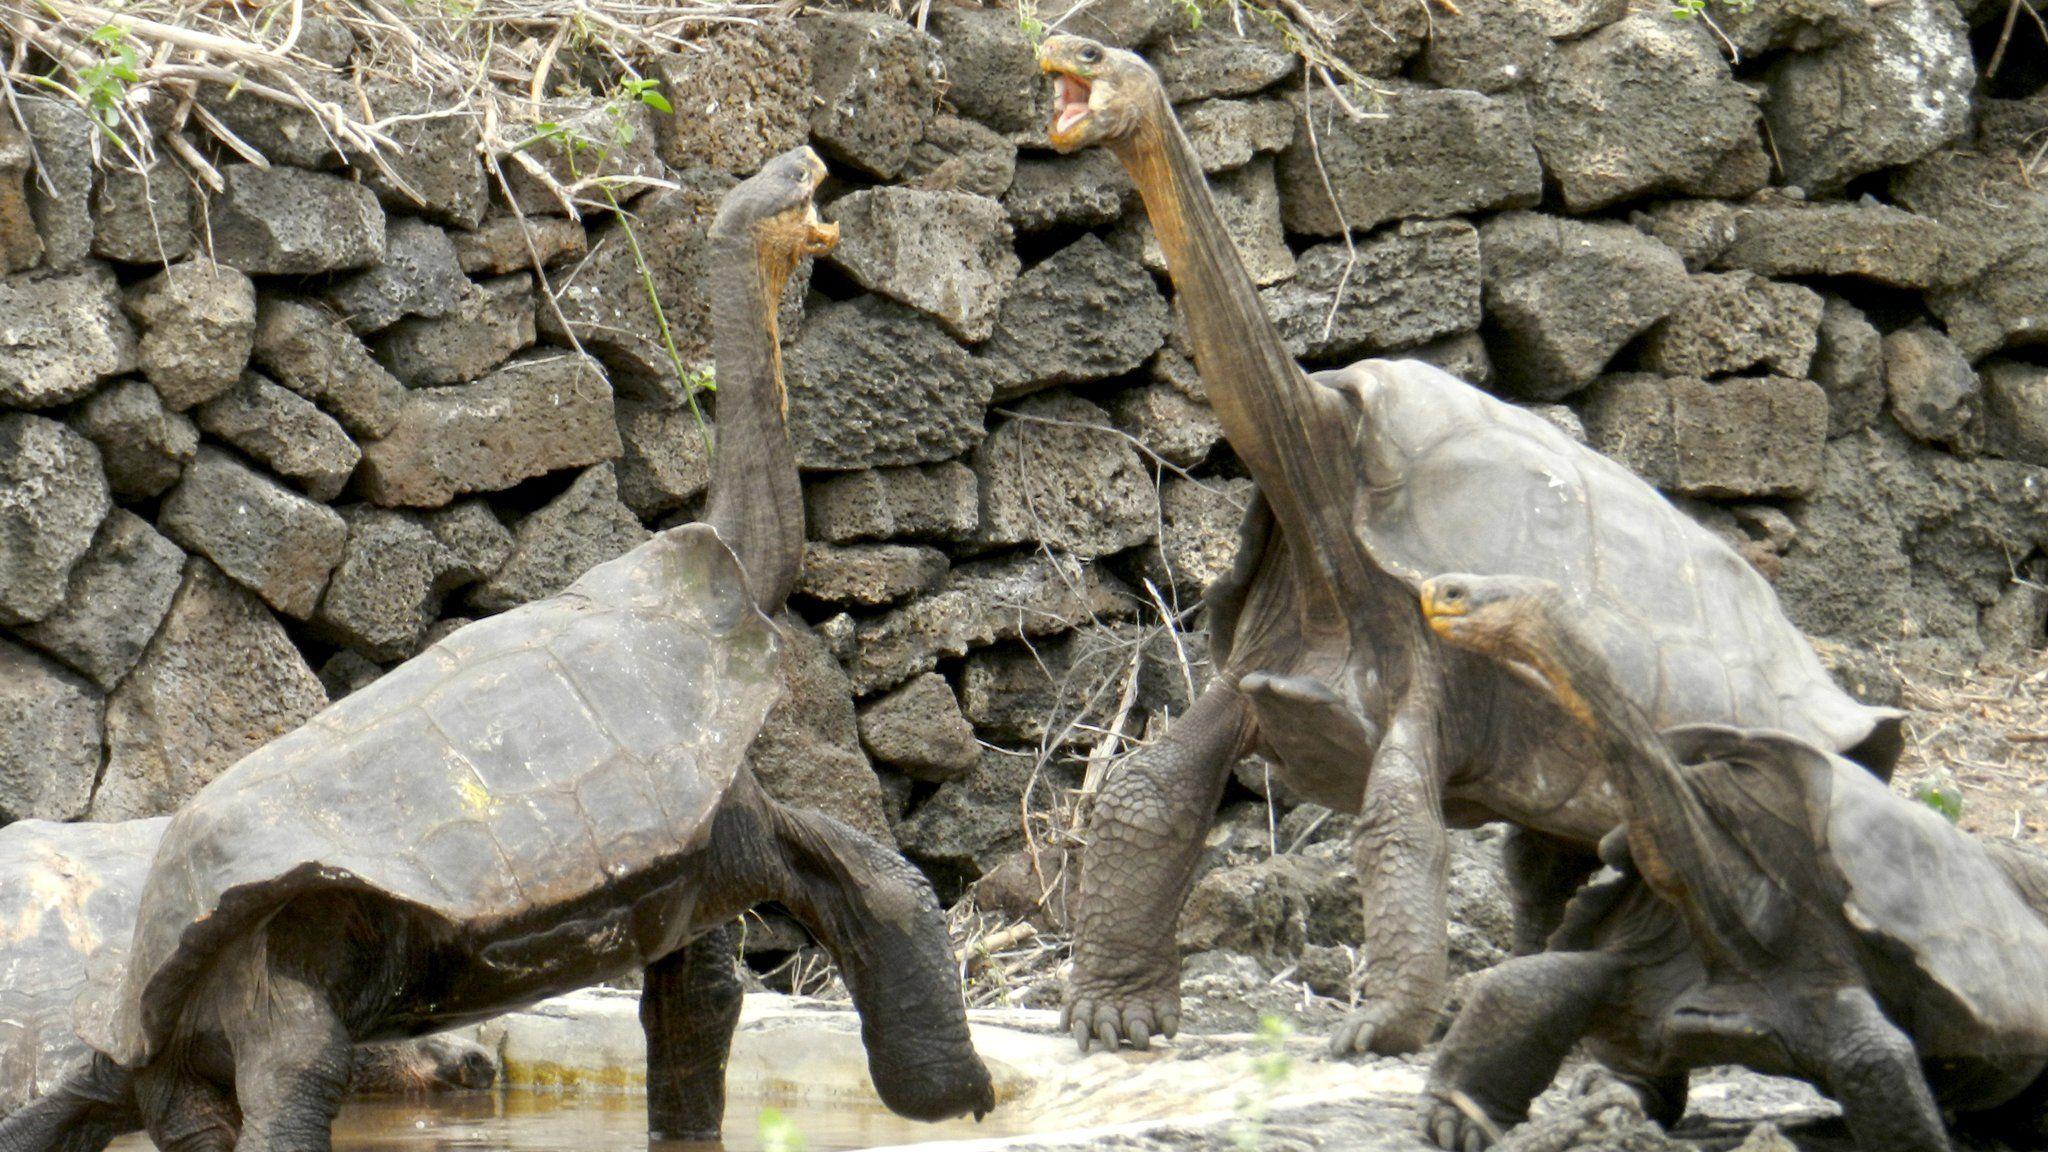 Scientists Hope to Bring a Galápagos Tortoise Species Back to Life